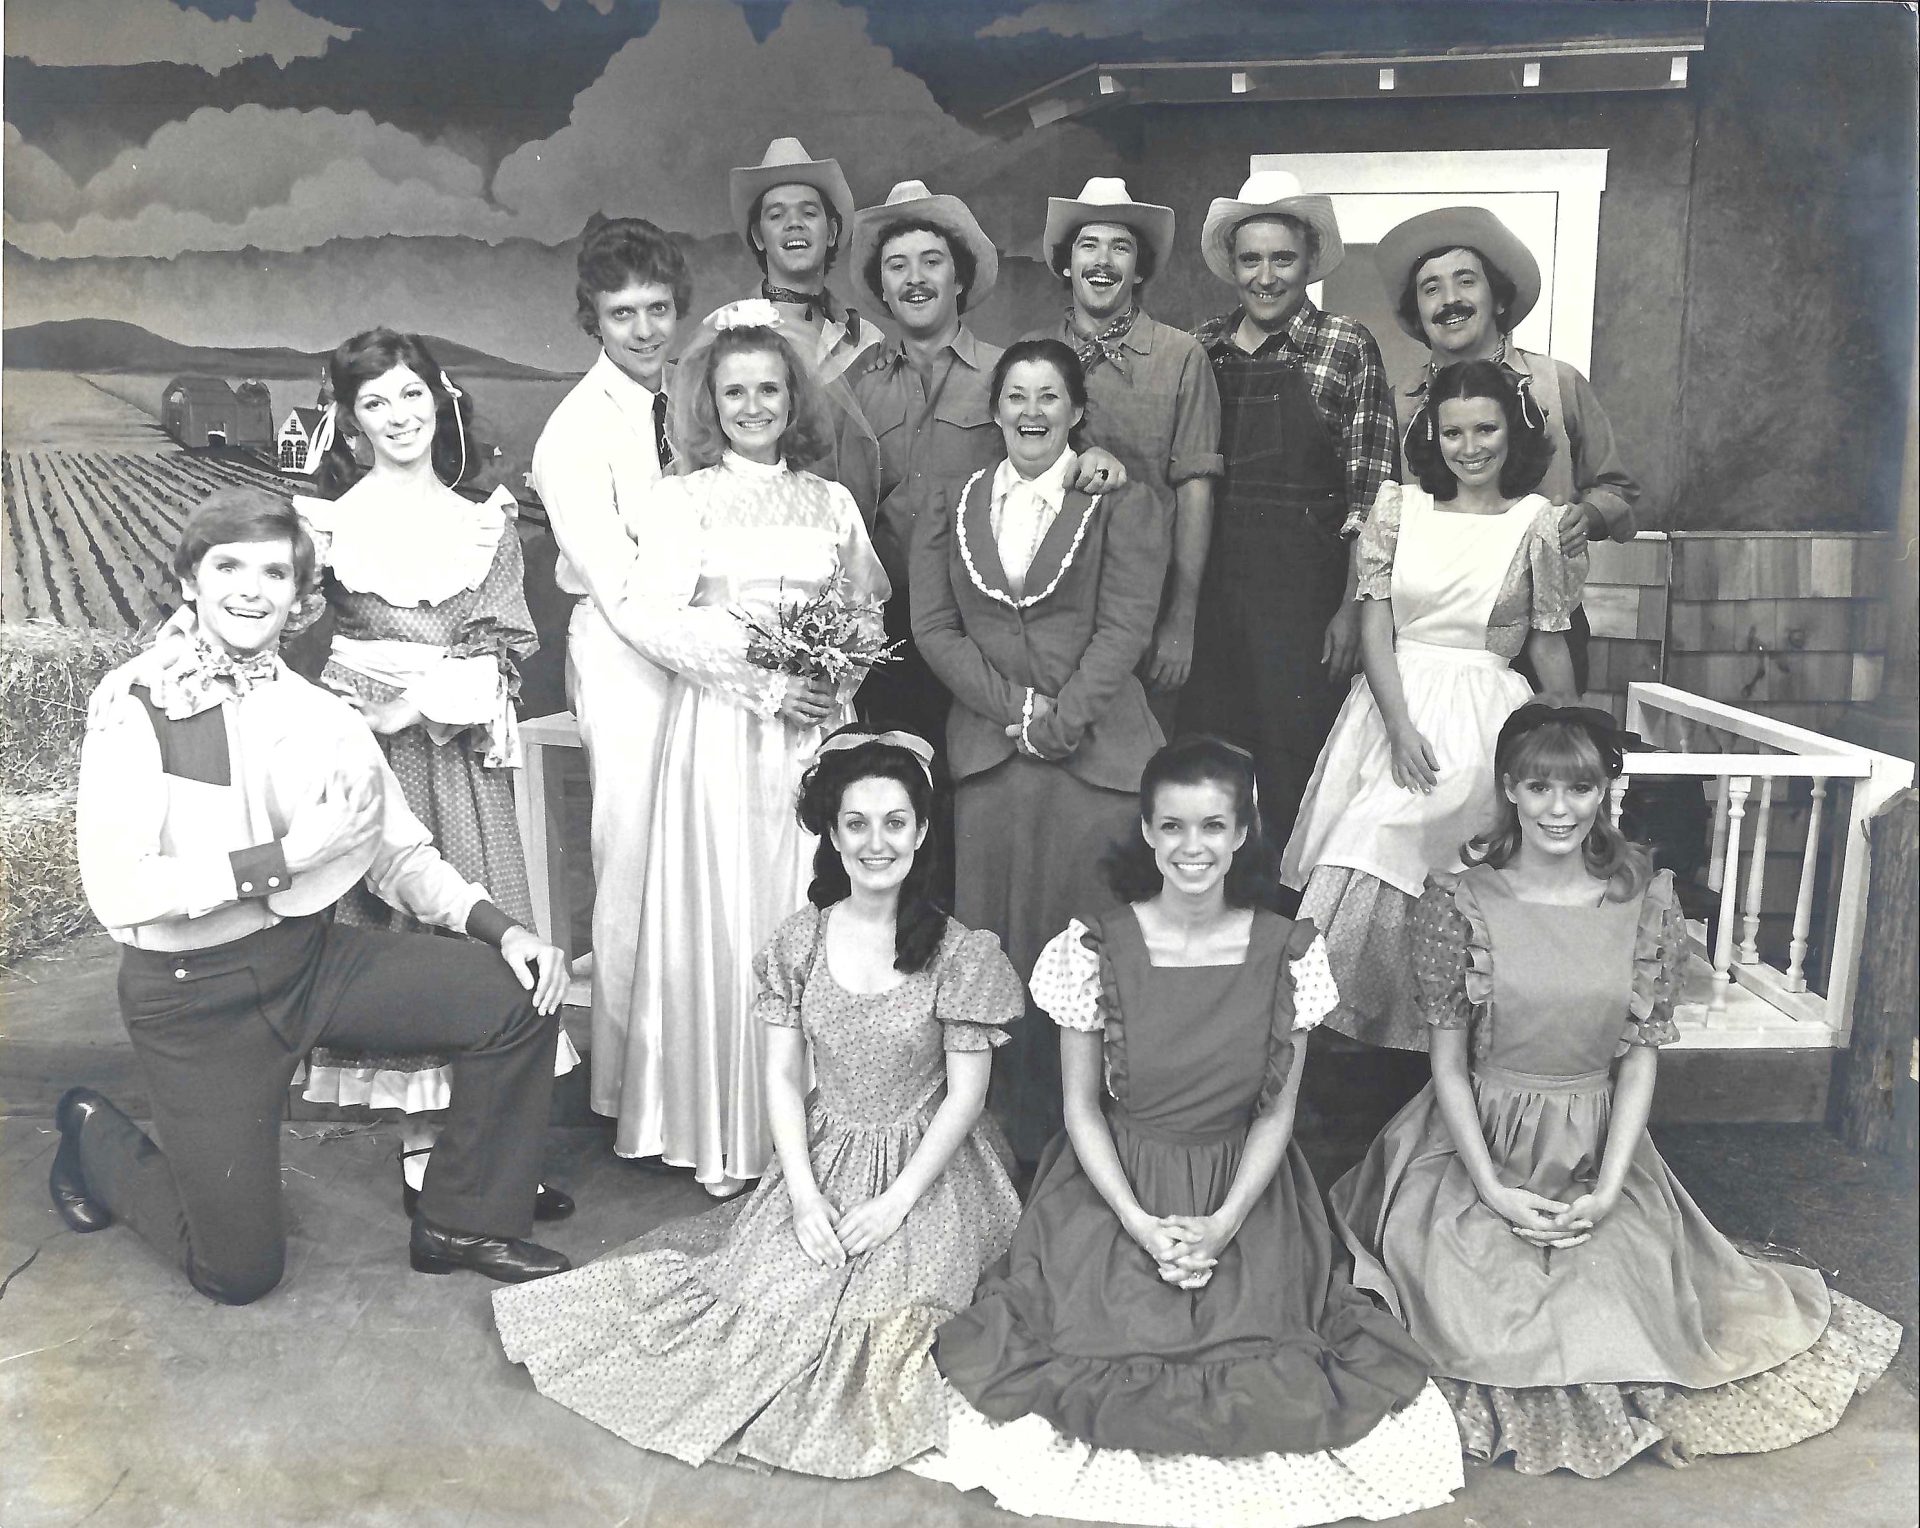 Jimmy in Oklahoma at Once Upon a Stage dinner theater Winter Park, FL Winter of 1976.